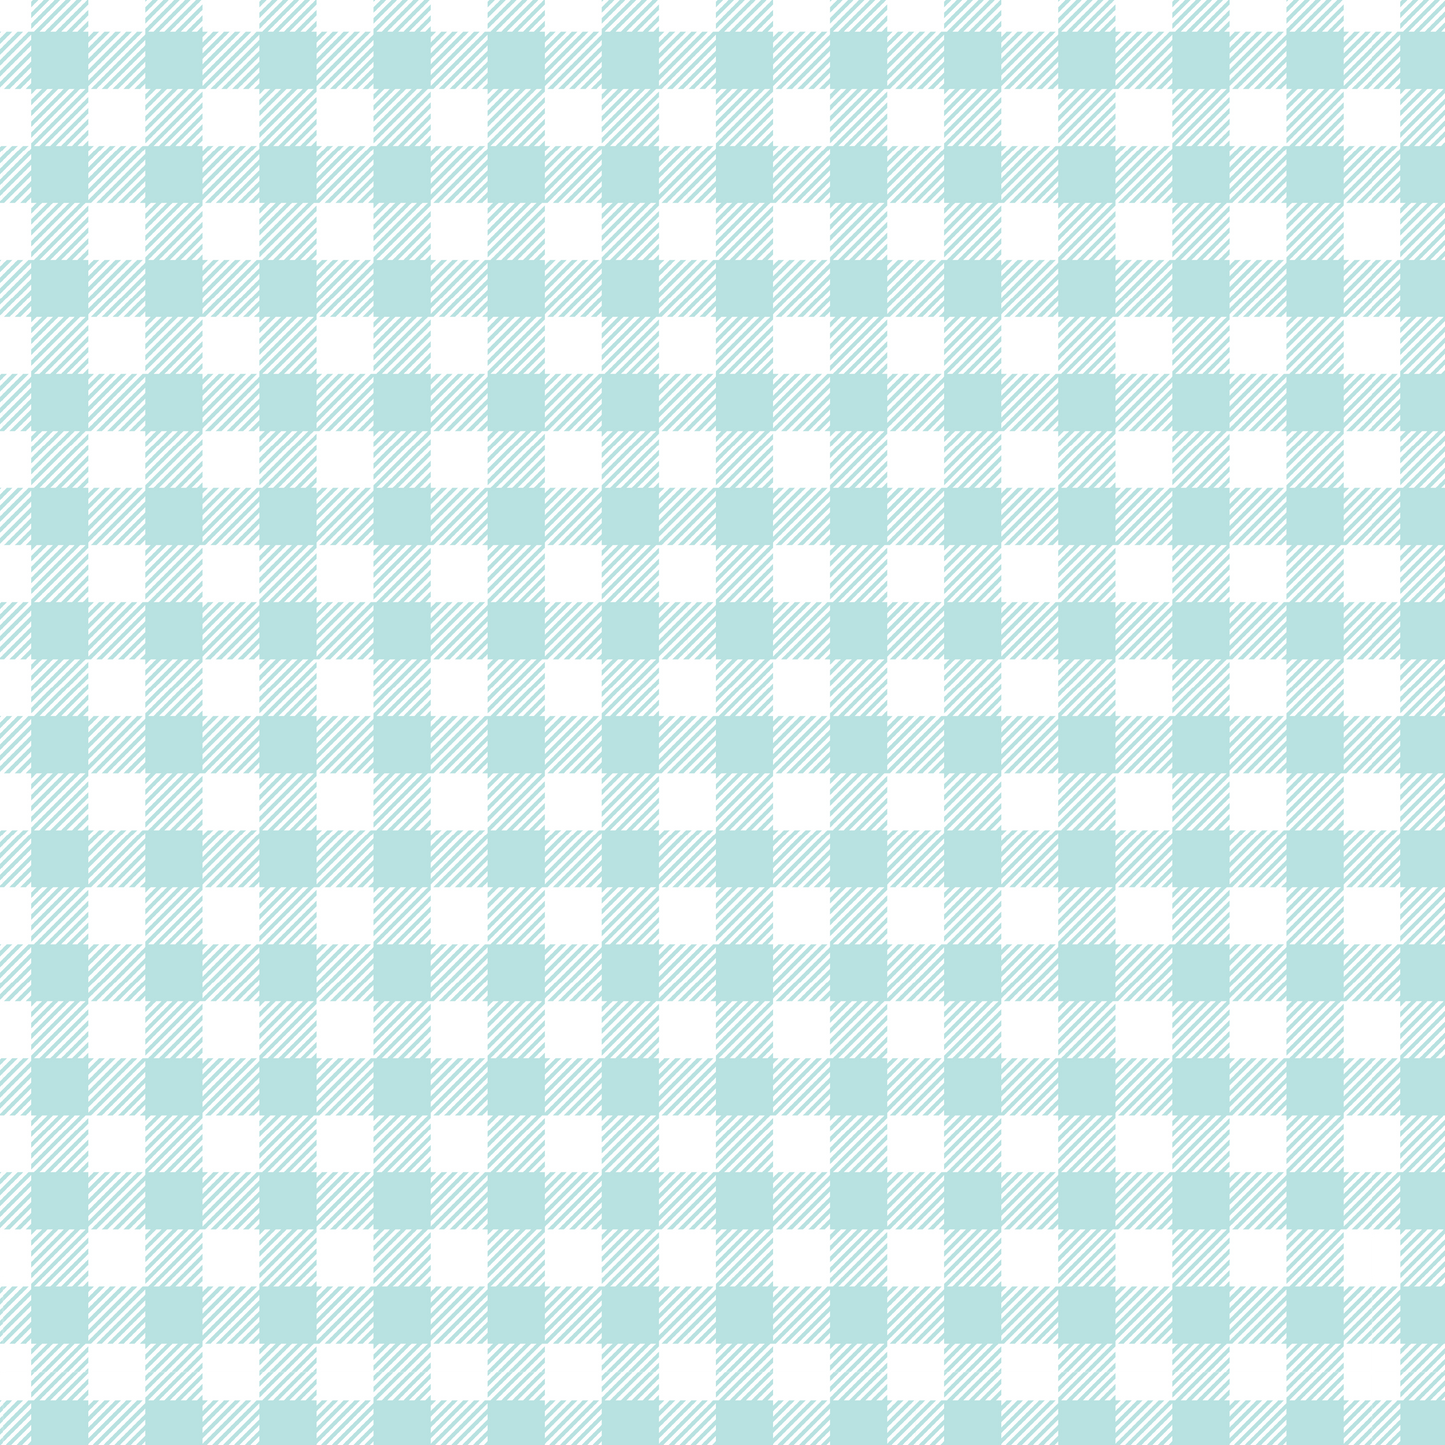 Easter Plaid - Mint and White 010